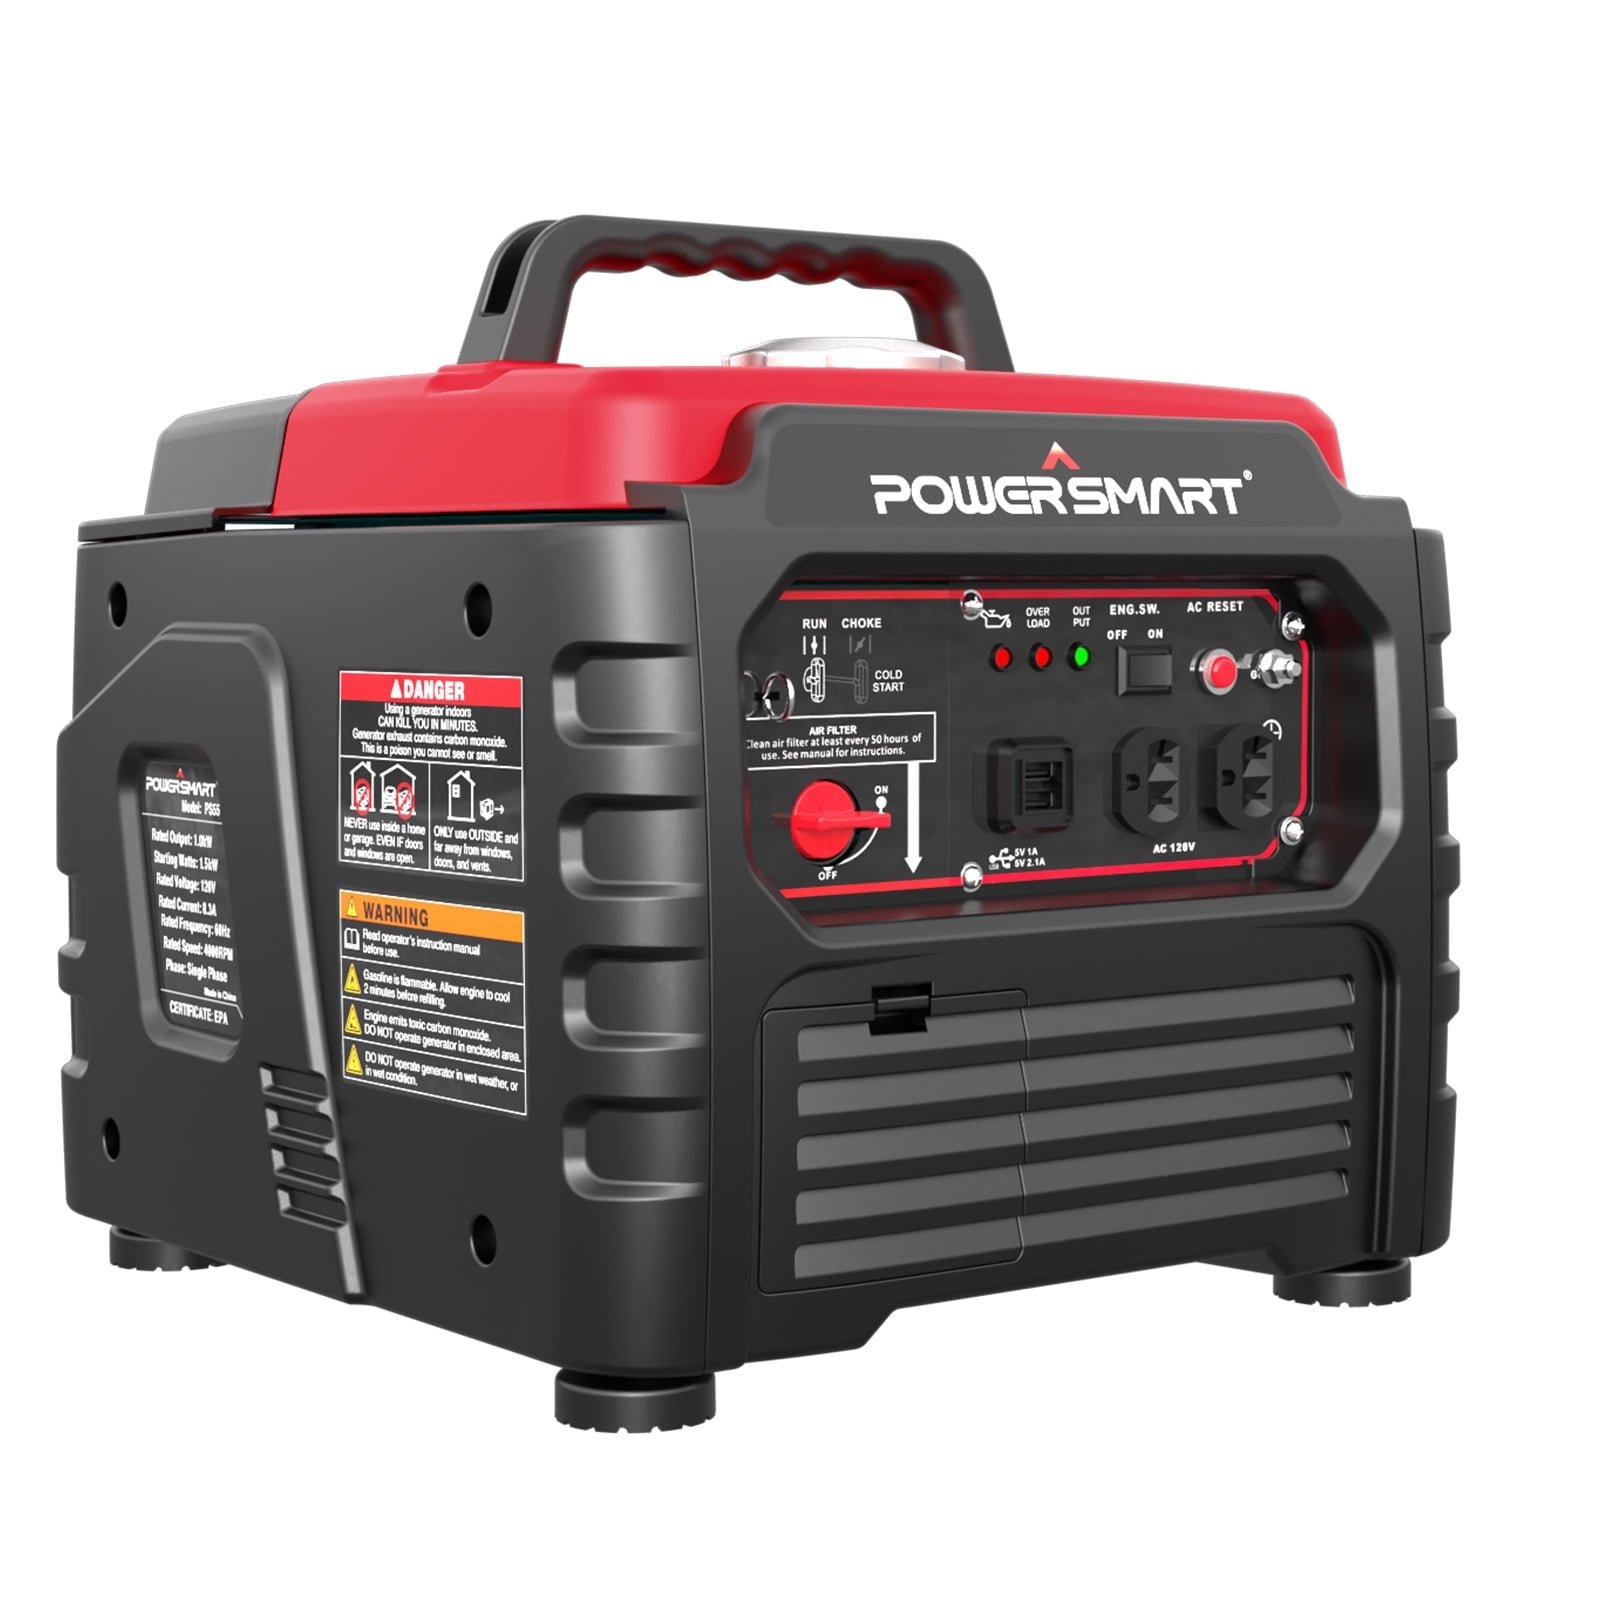 PowerSmart-1500-Watt-Portable-Gas-Power-Generator-for-Outdoor-Camping-and-Home-Use-Inverter-Generator-PS55_e2f945ed-f665-4f0a-9255-7e998b7d46a8.d37870a97bc292d86d8248cdafbe7f50.jpeg